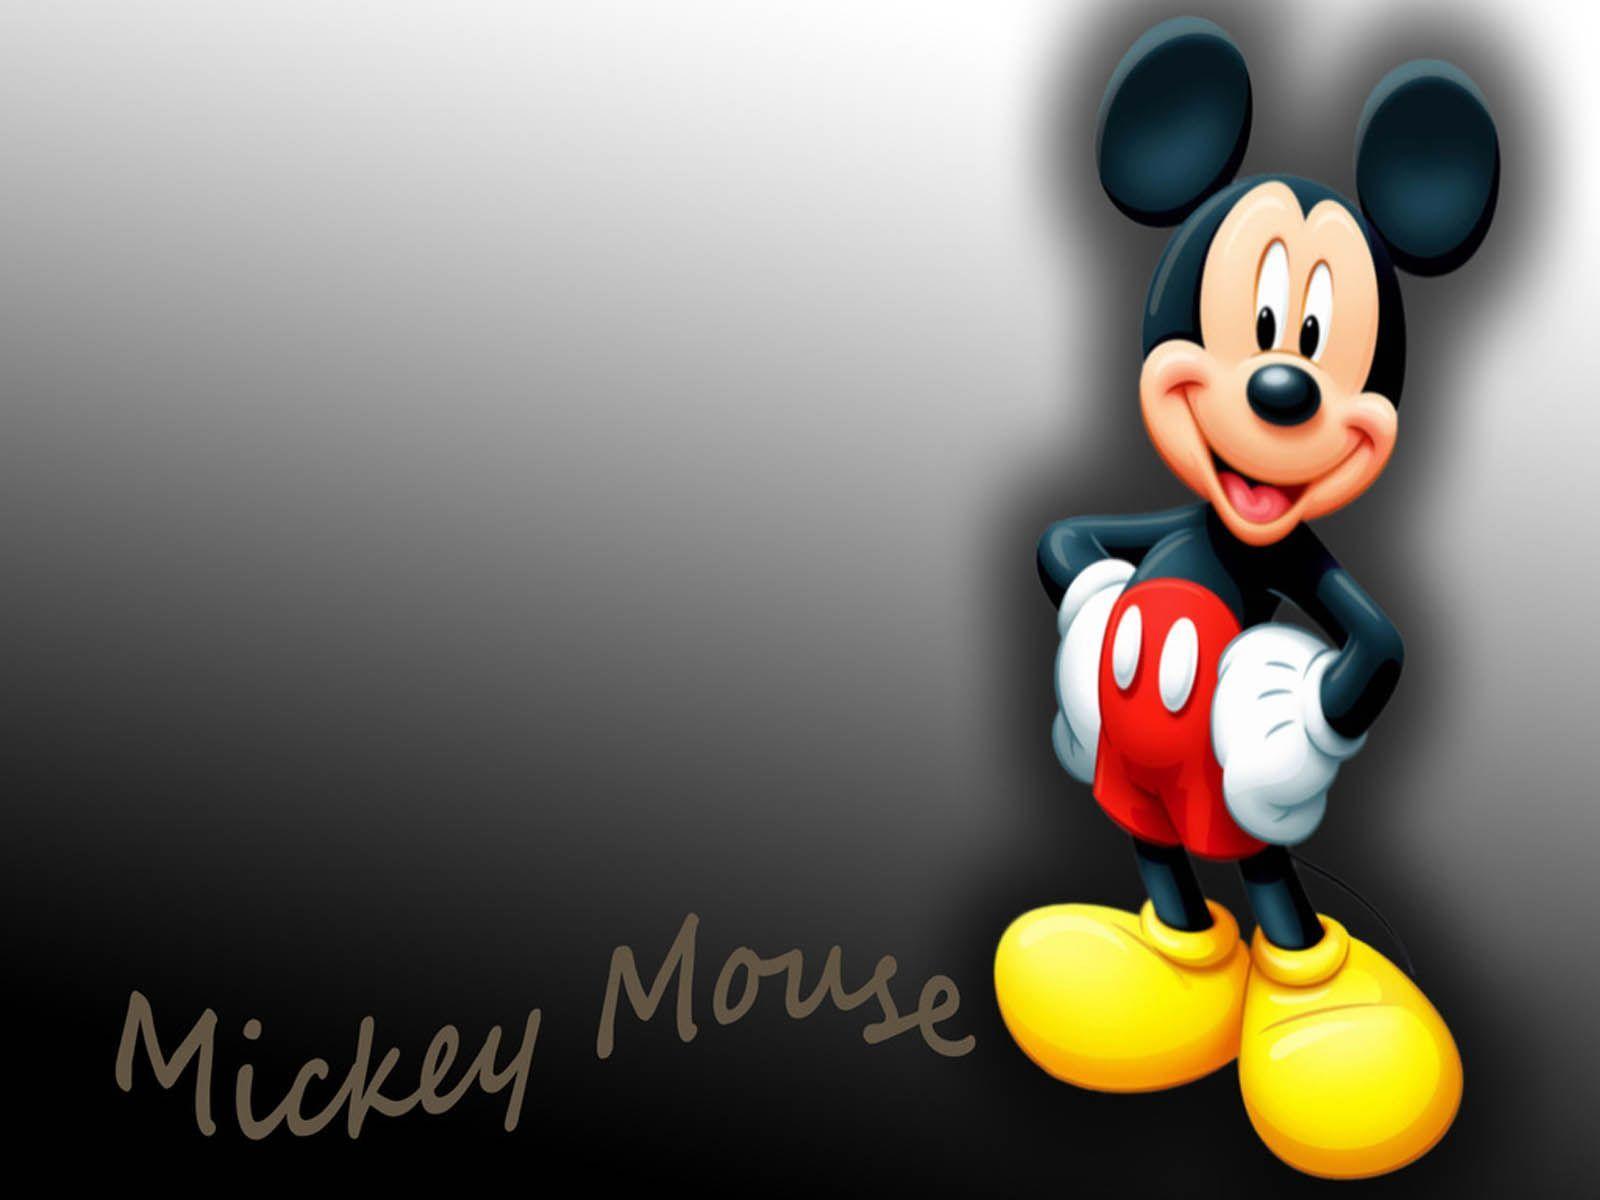 Mickey Mouse Background Wallpaper. wallpaper. Mickey